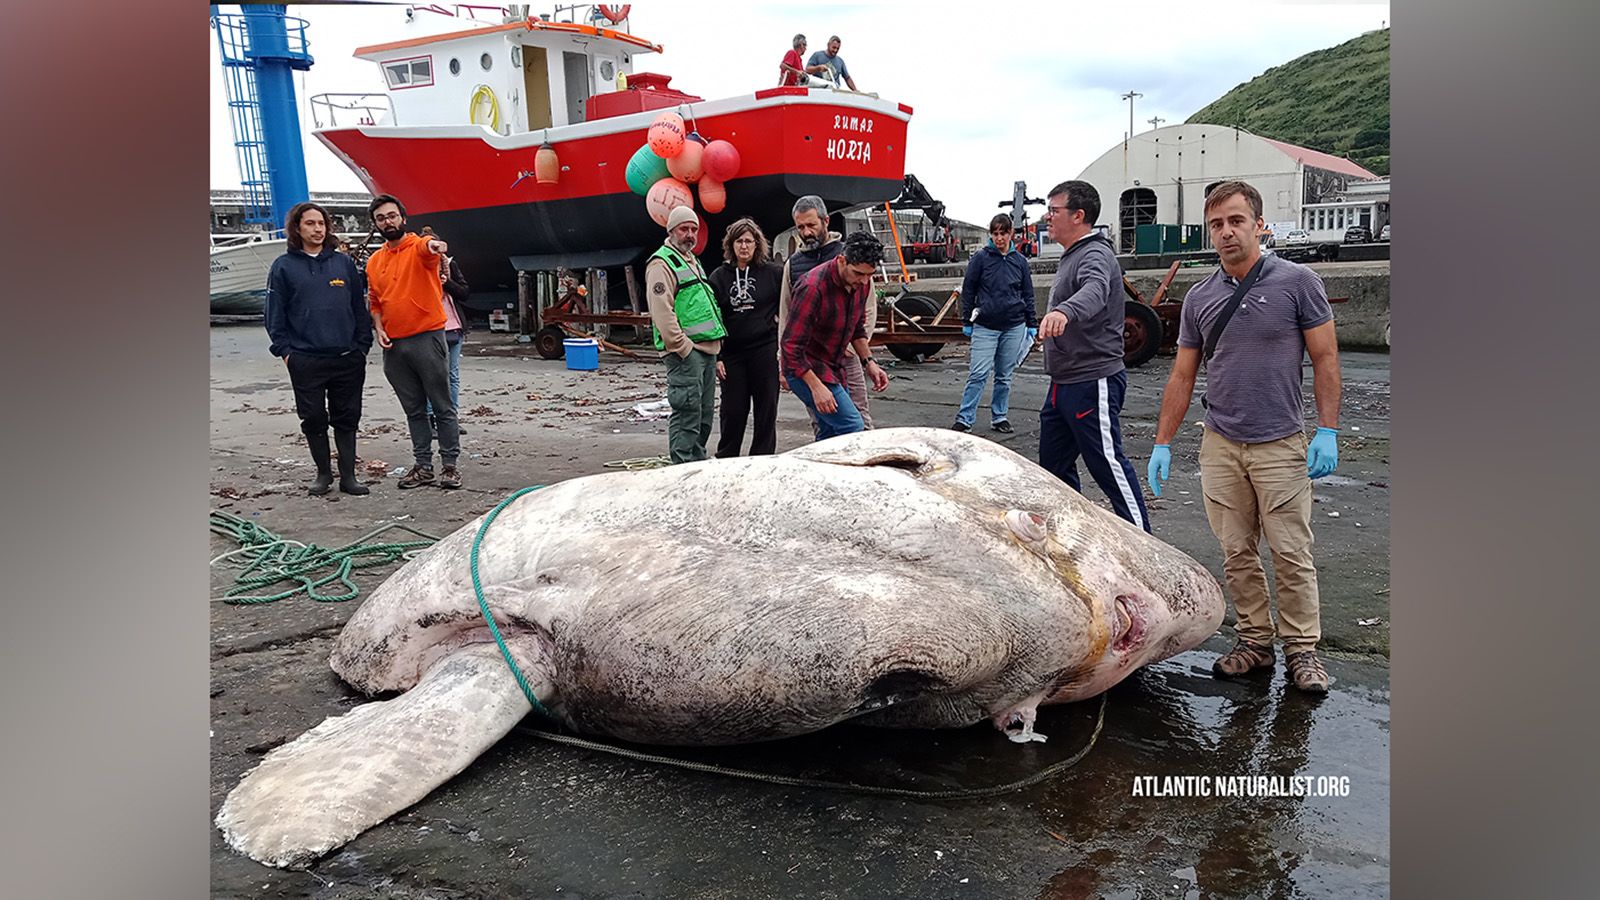 Sunfish believed to be record-breaking bony fish weighing 3 tons